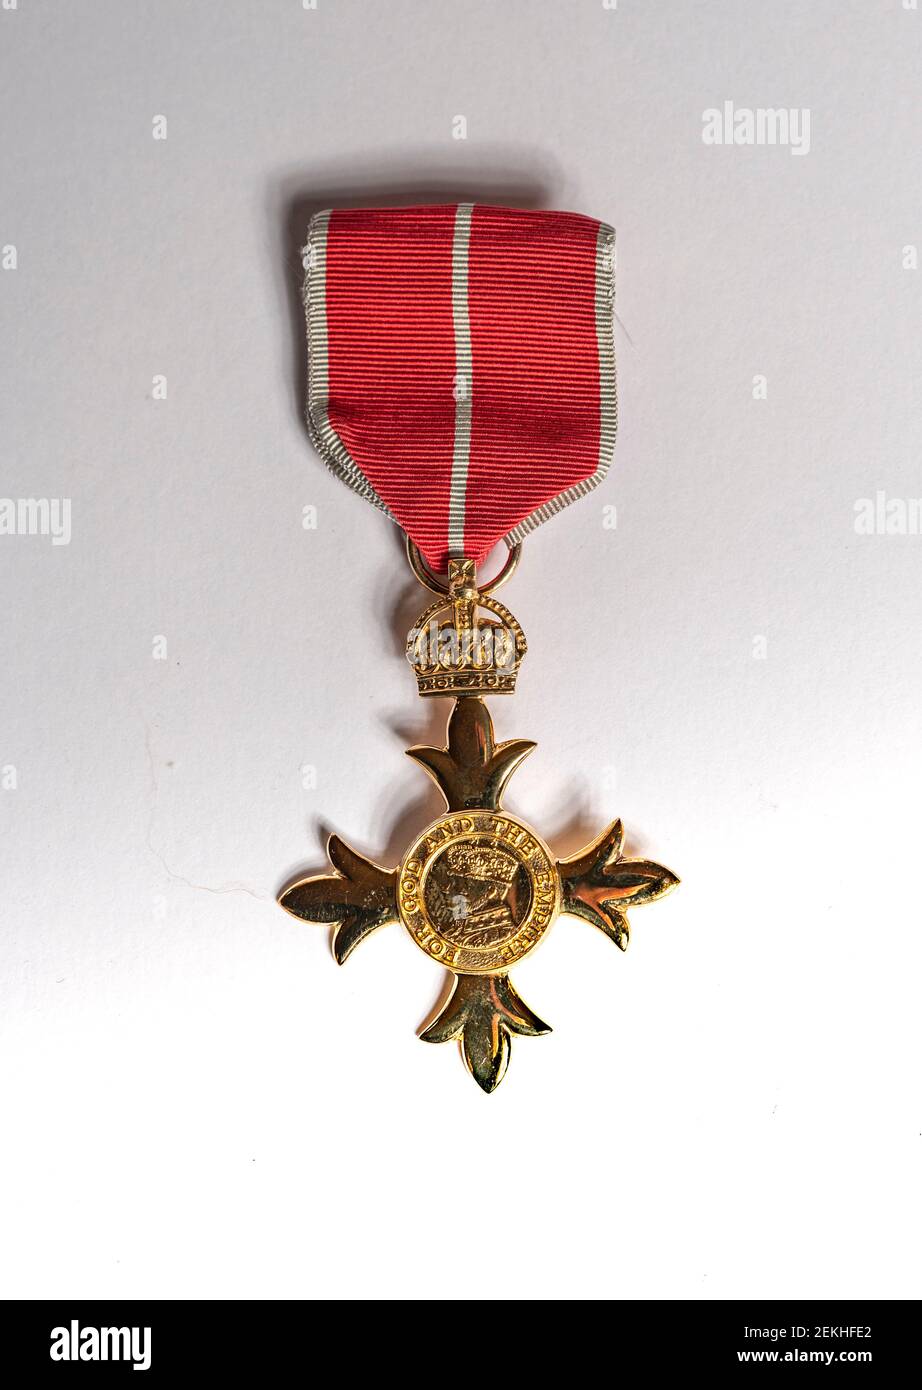 The OBE Medal - The Most Excellent Order of the British Empire is an order of chivalry, the OBE signifies an Officer of the Order Stock Photo